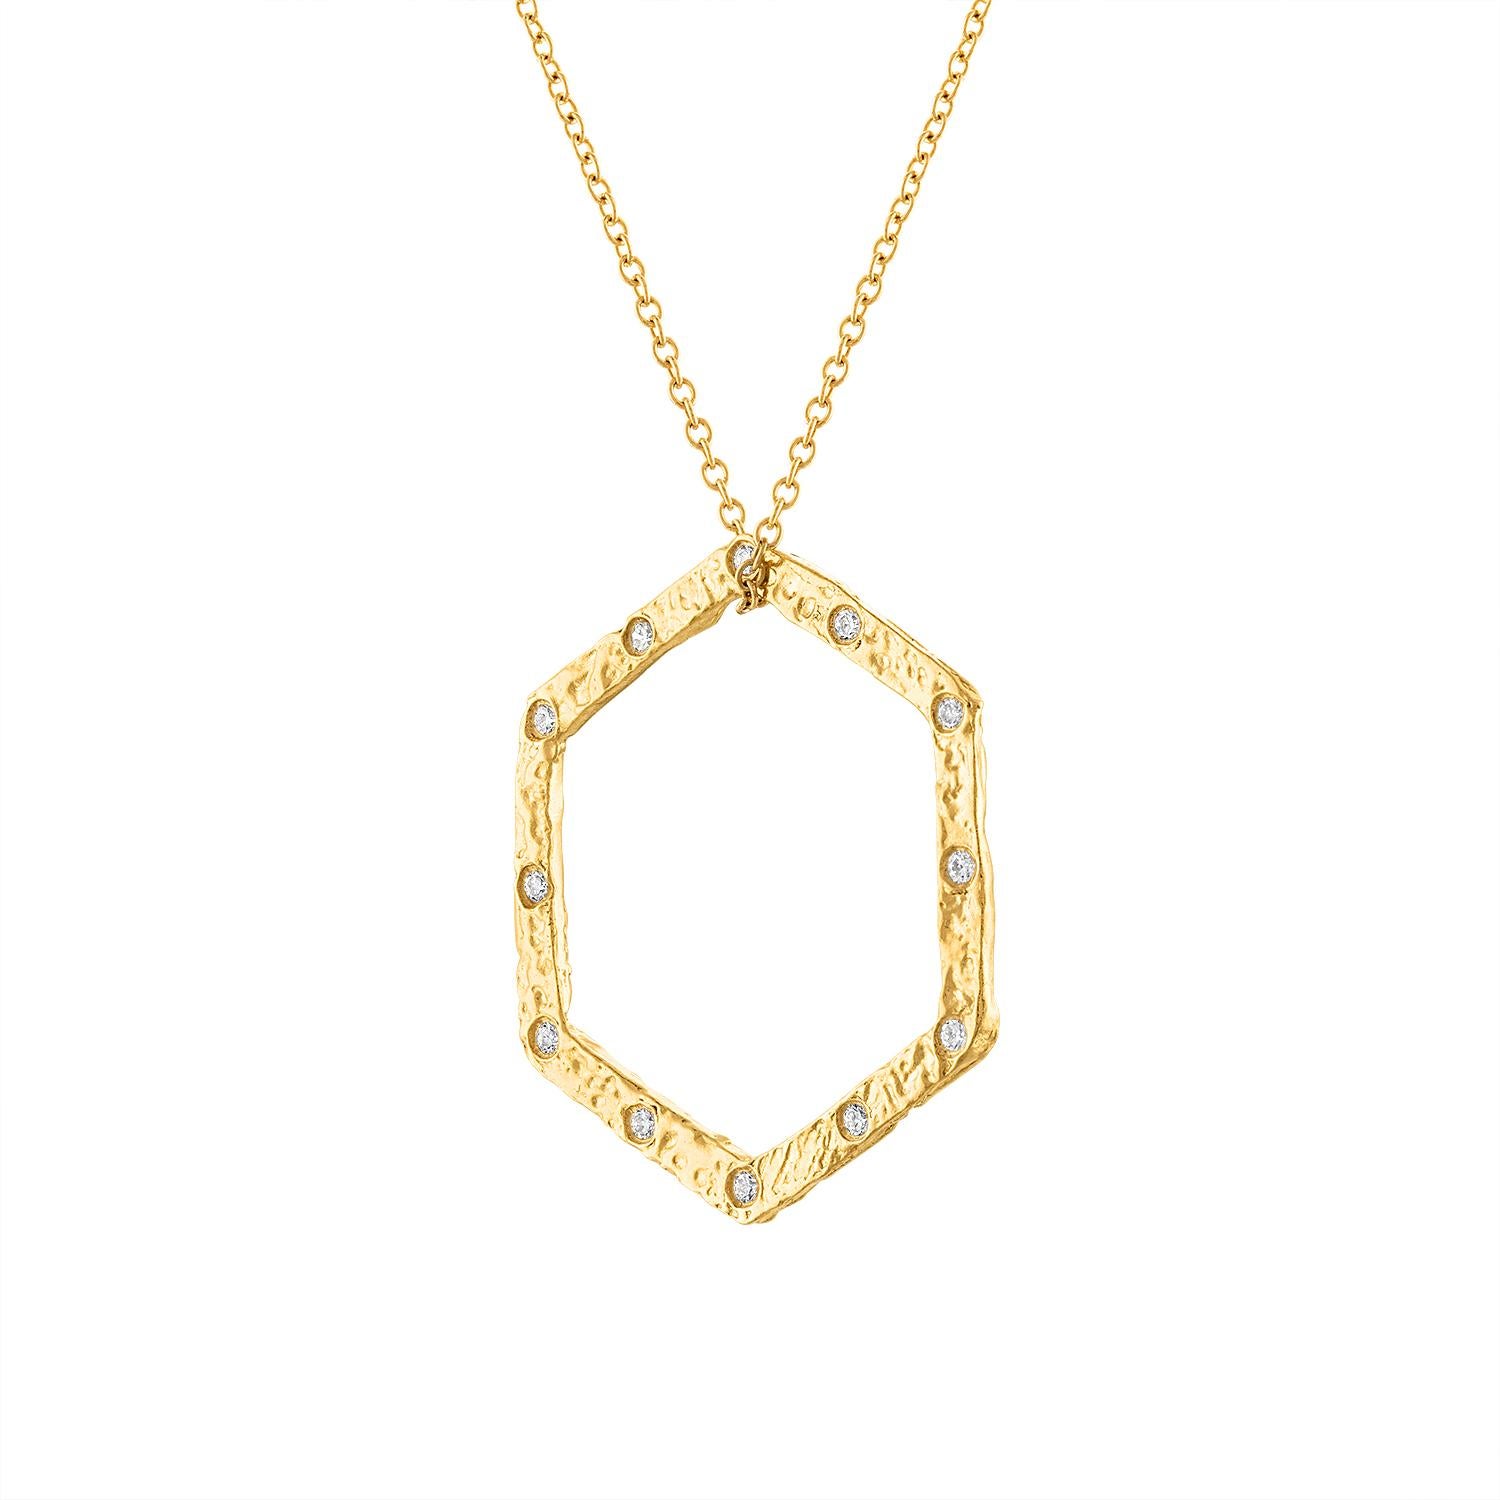 This diamond Hexagon Necklace is a stunning piece that combines modern design with timeless elegance. The necklace features a Hexagon adorned with diamonds scattered throughout creating a look that is both eye catching and sophisticated. Unique with